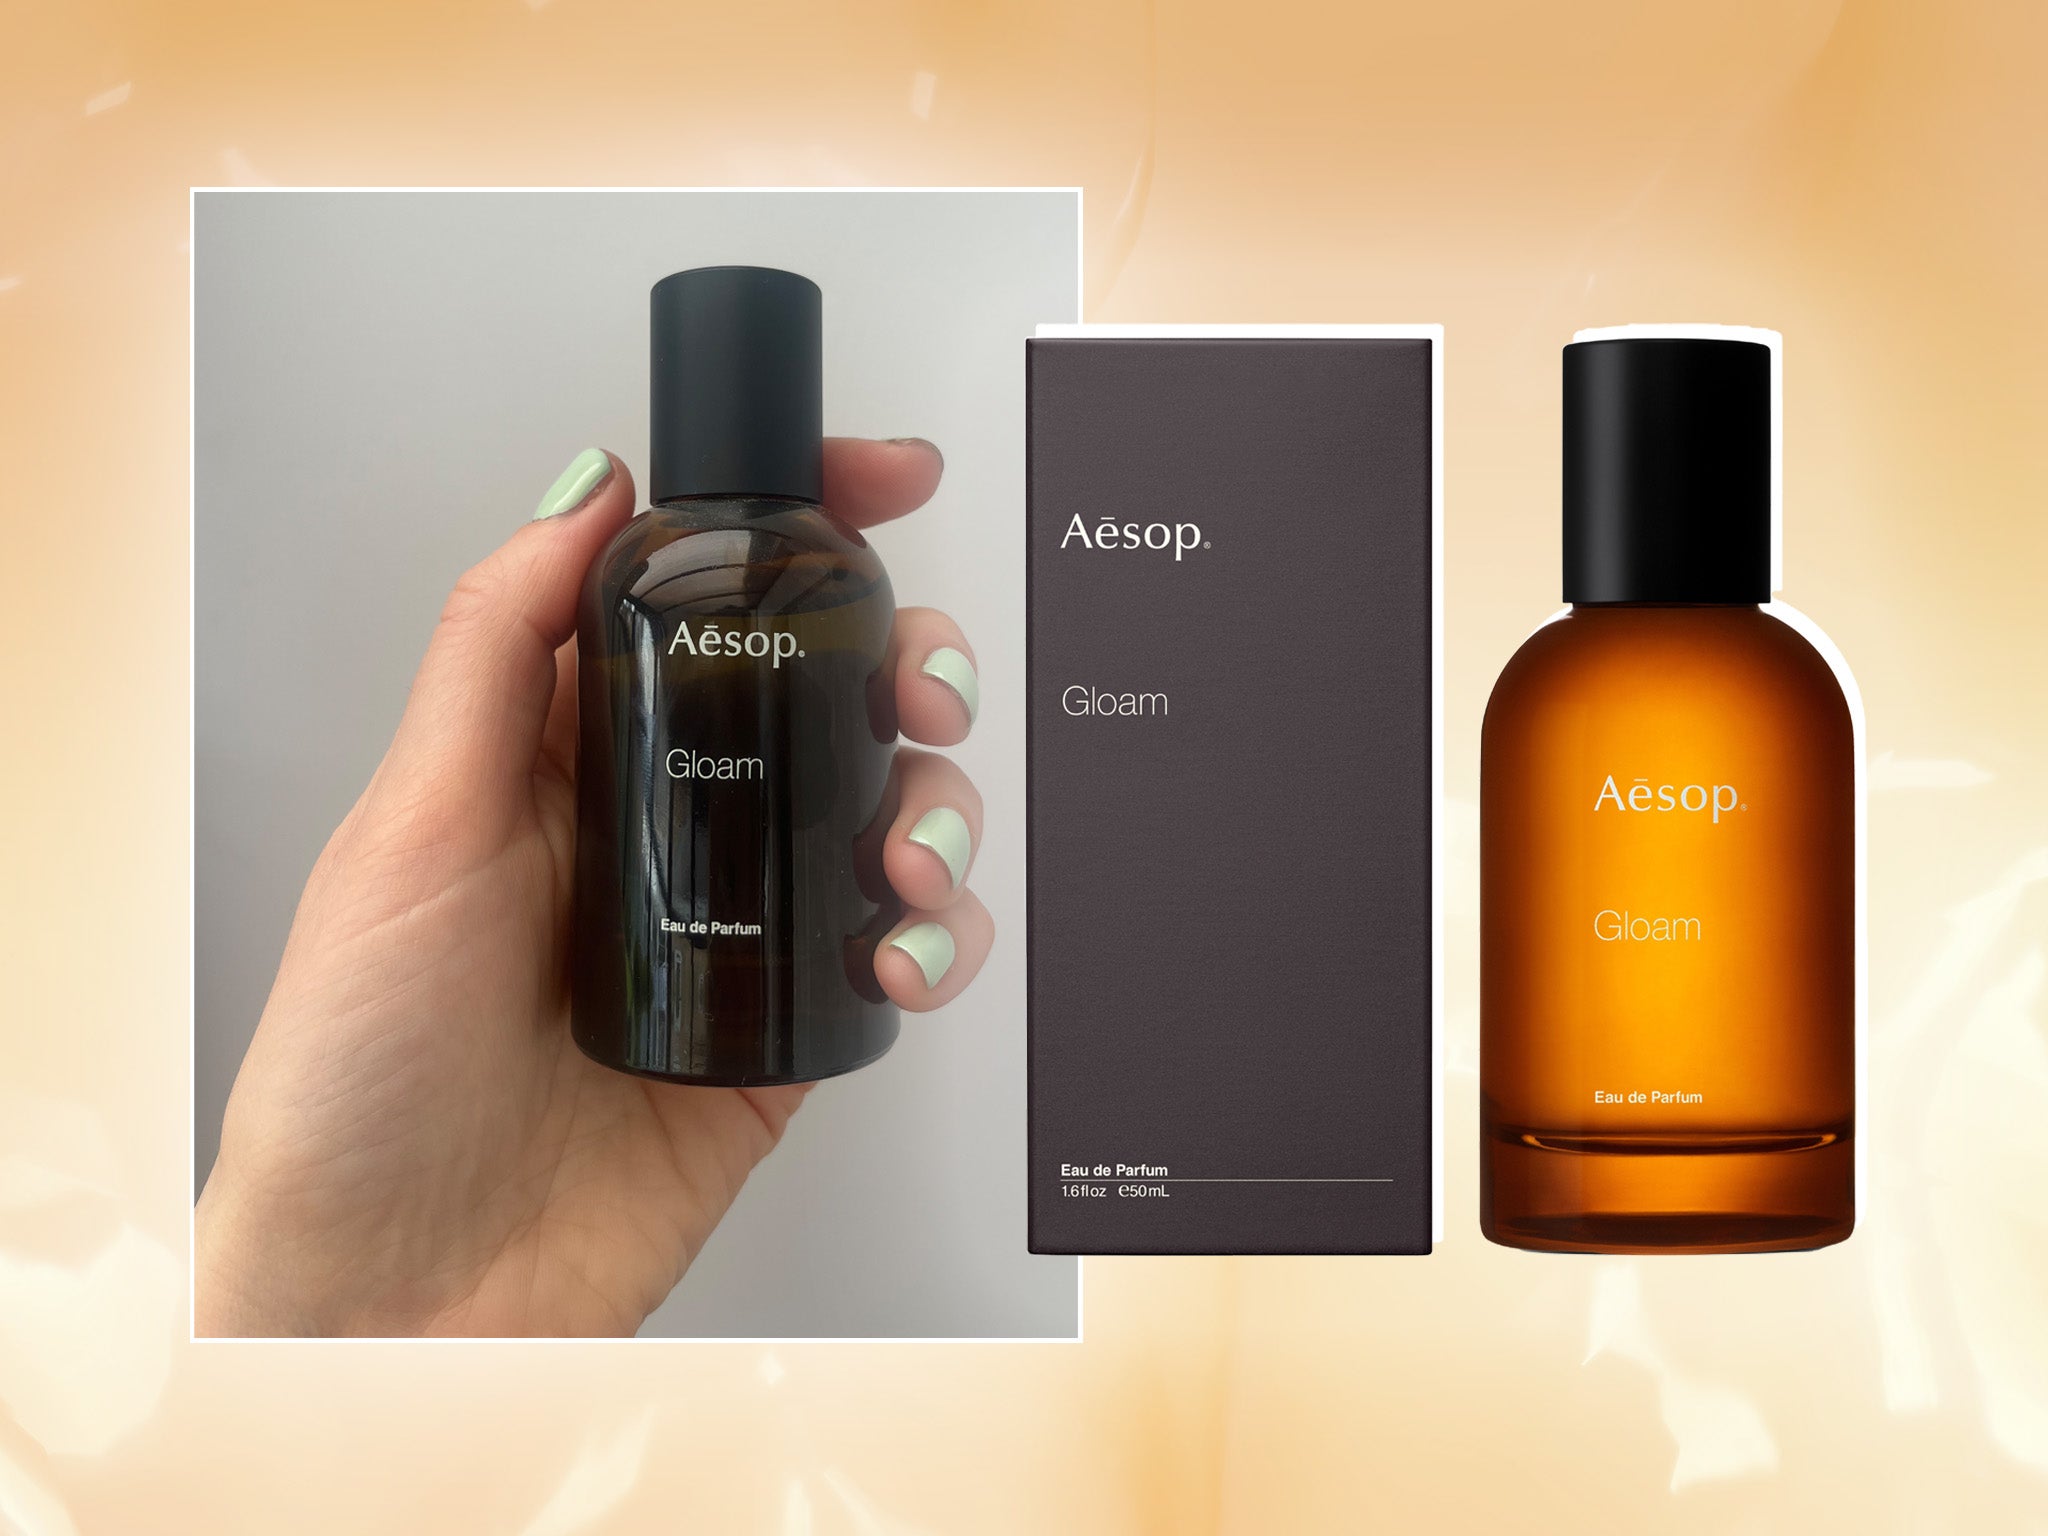 Aēsop gloam review: We've spent a month sampling the latest